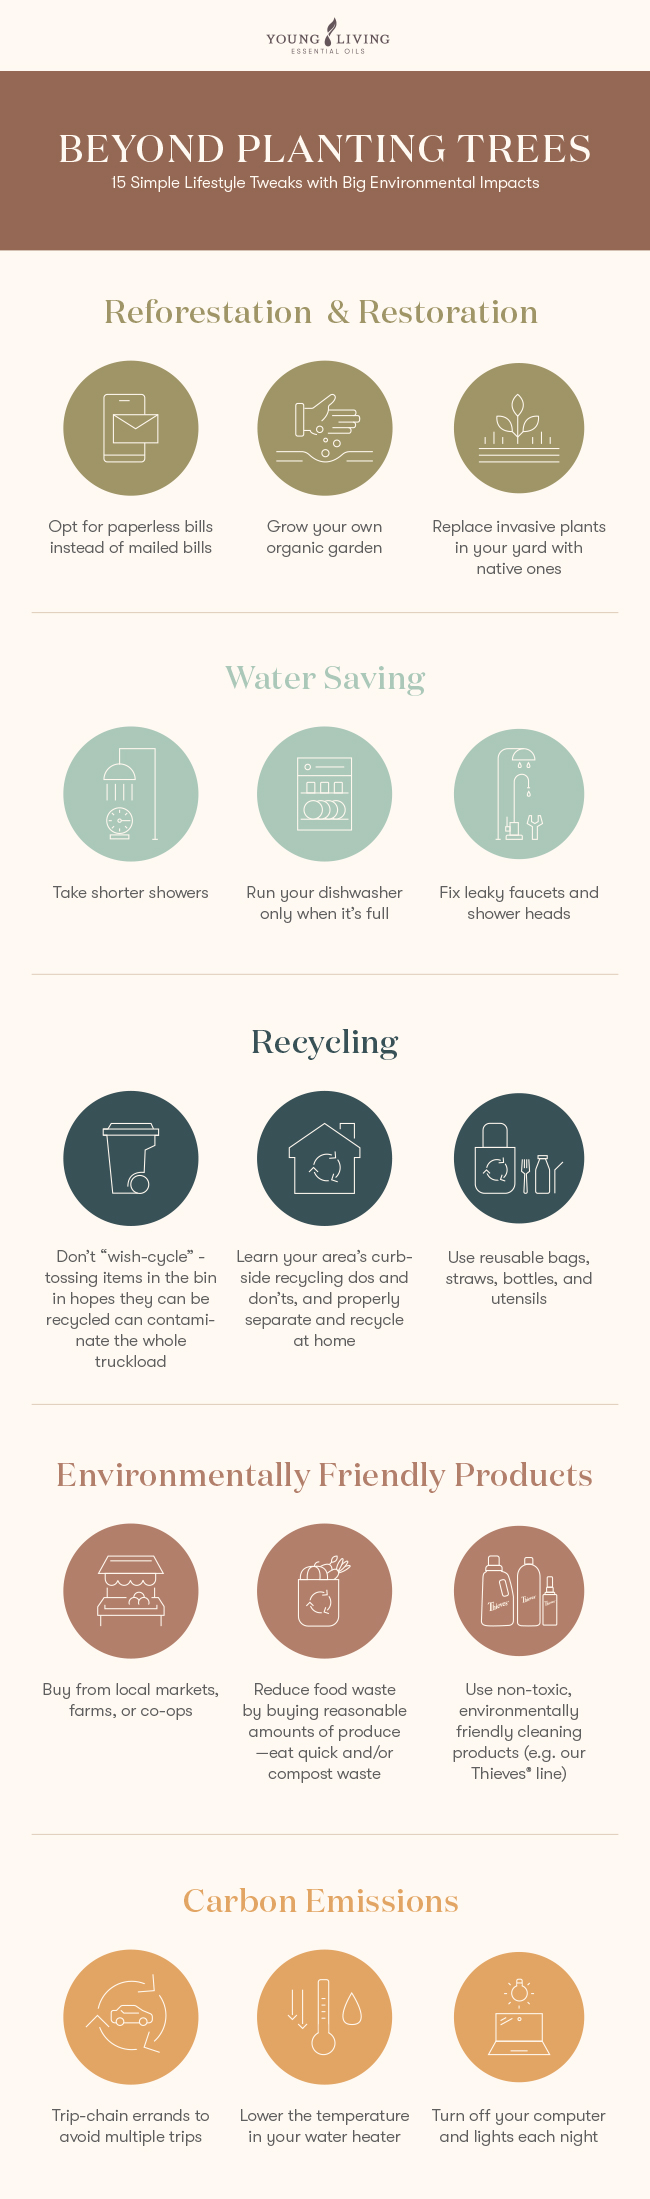 Restore the Earth Infographic - 15 simple tweaks with big environmental impacts